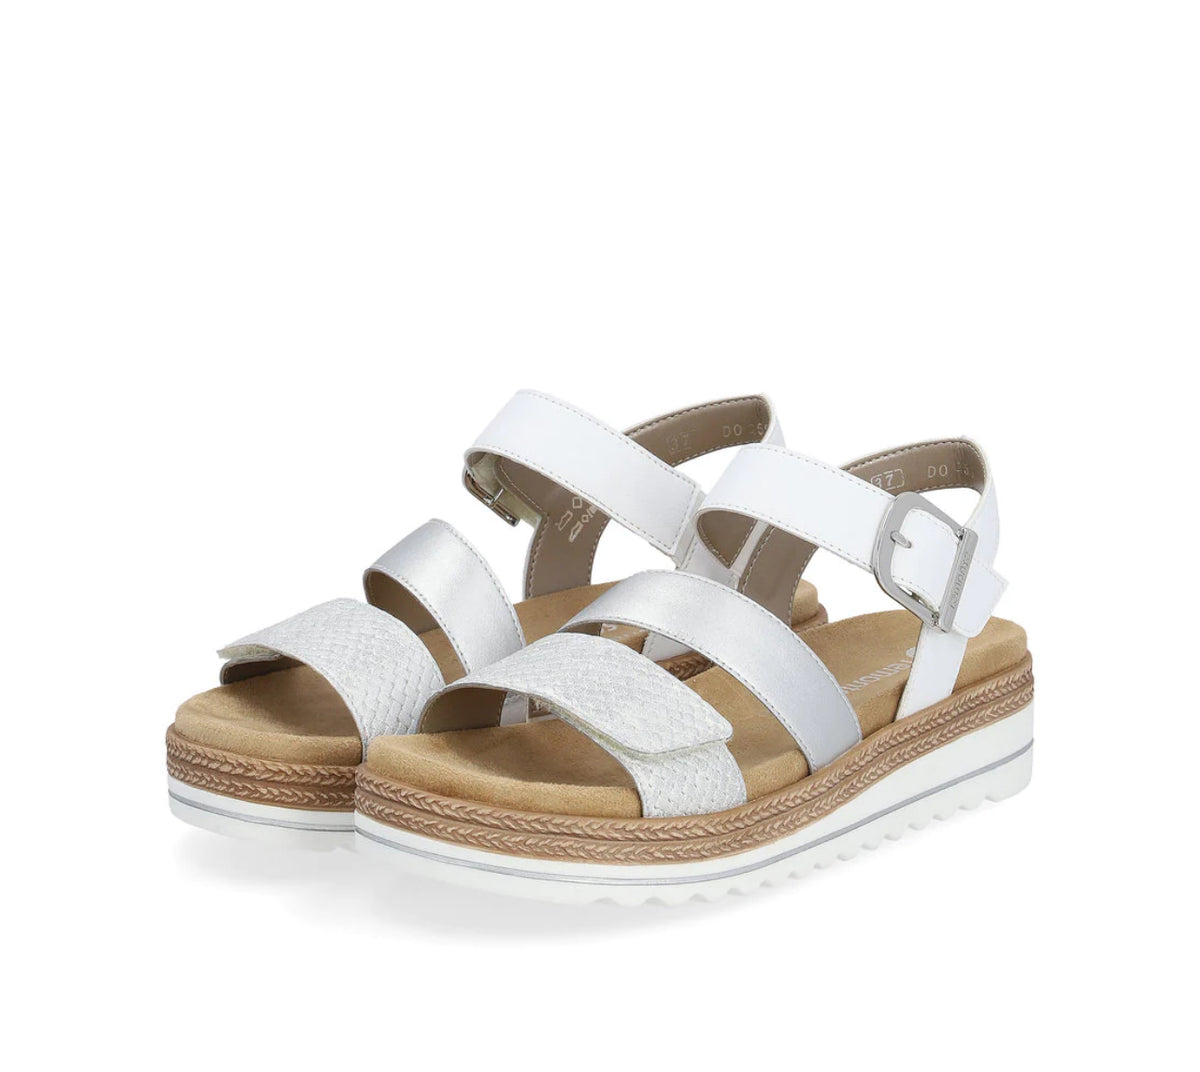 Remonte - D0Q55 White and Silver Gladiator Sandal